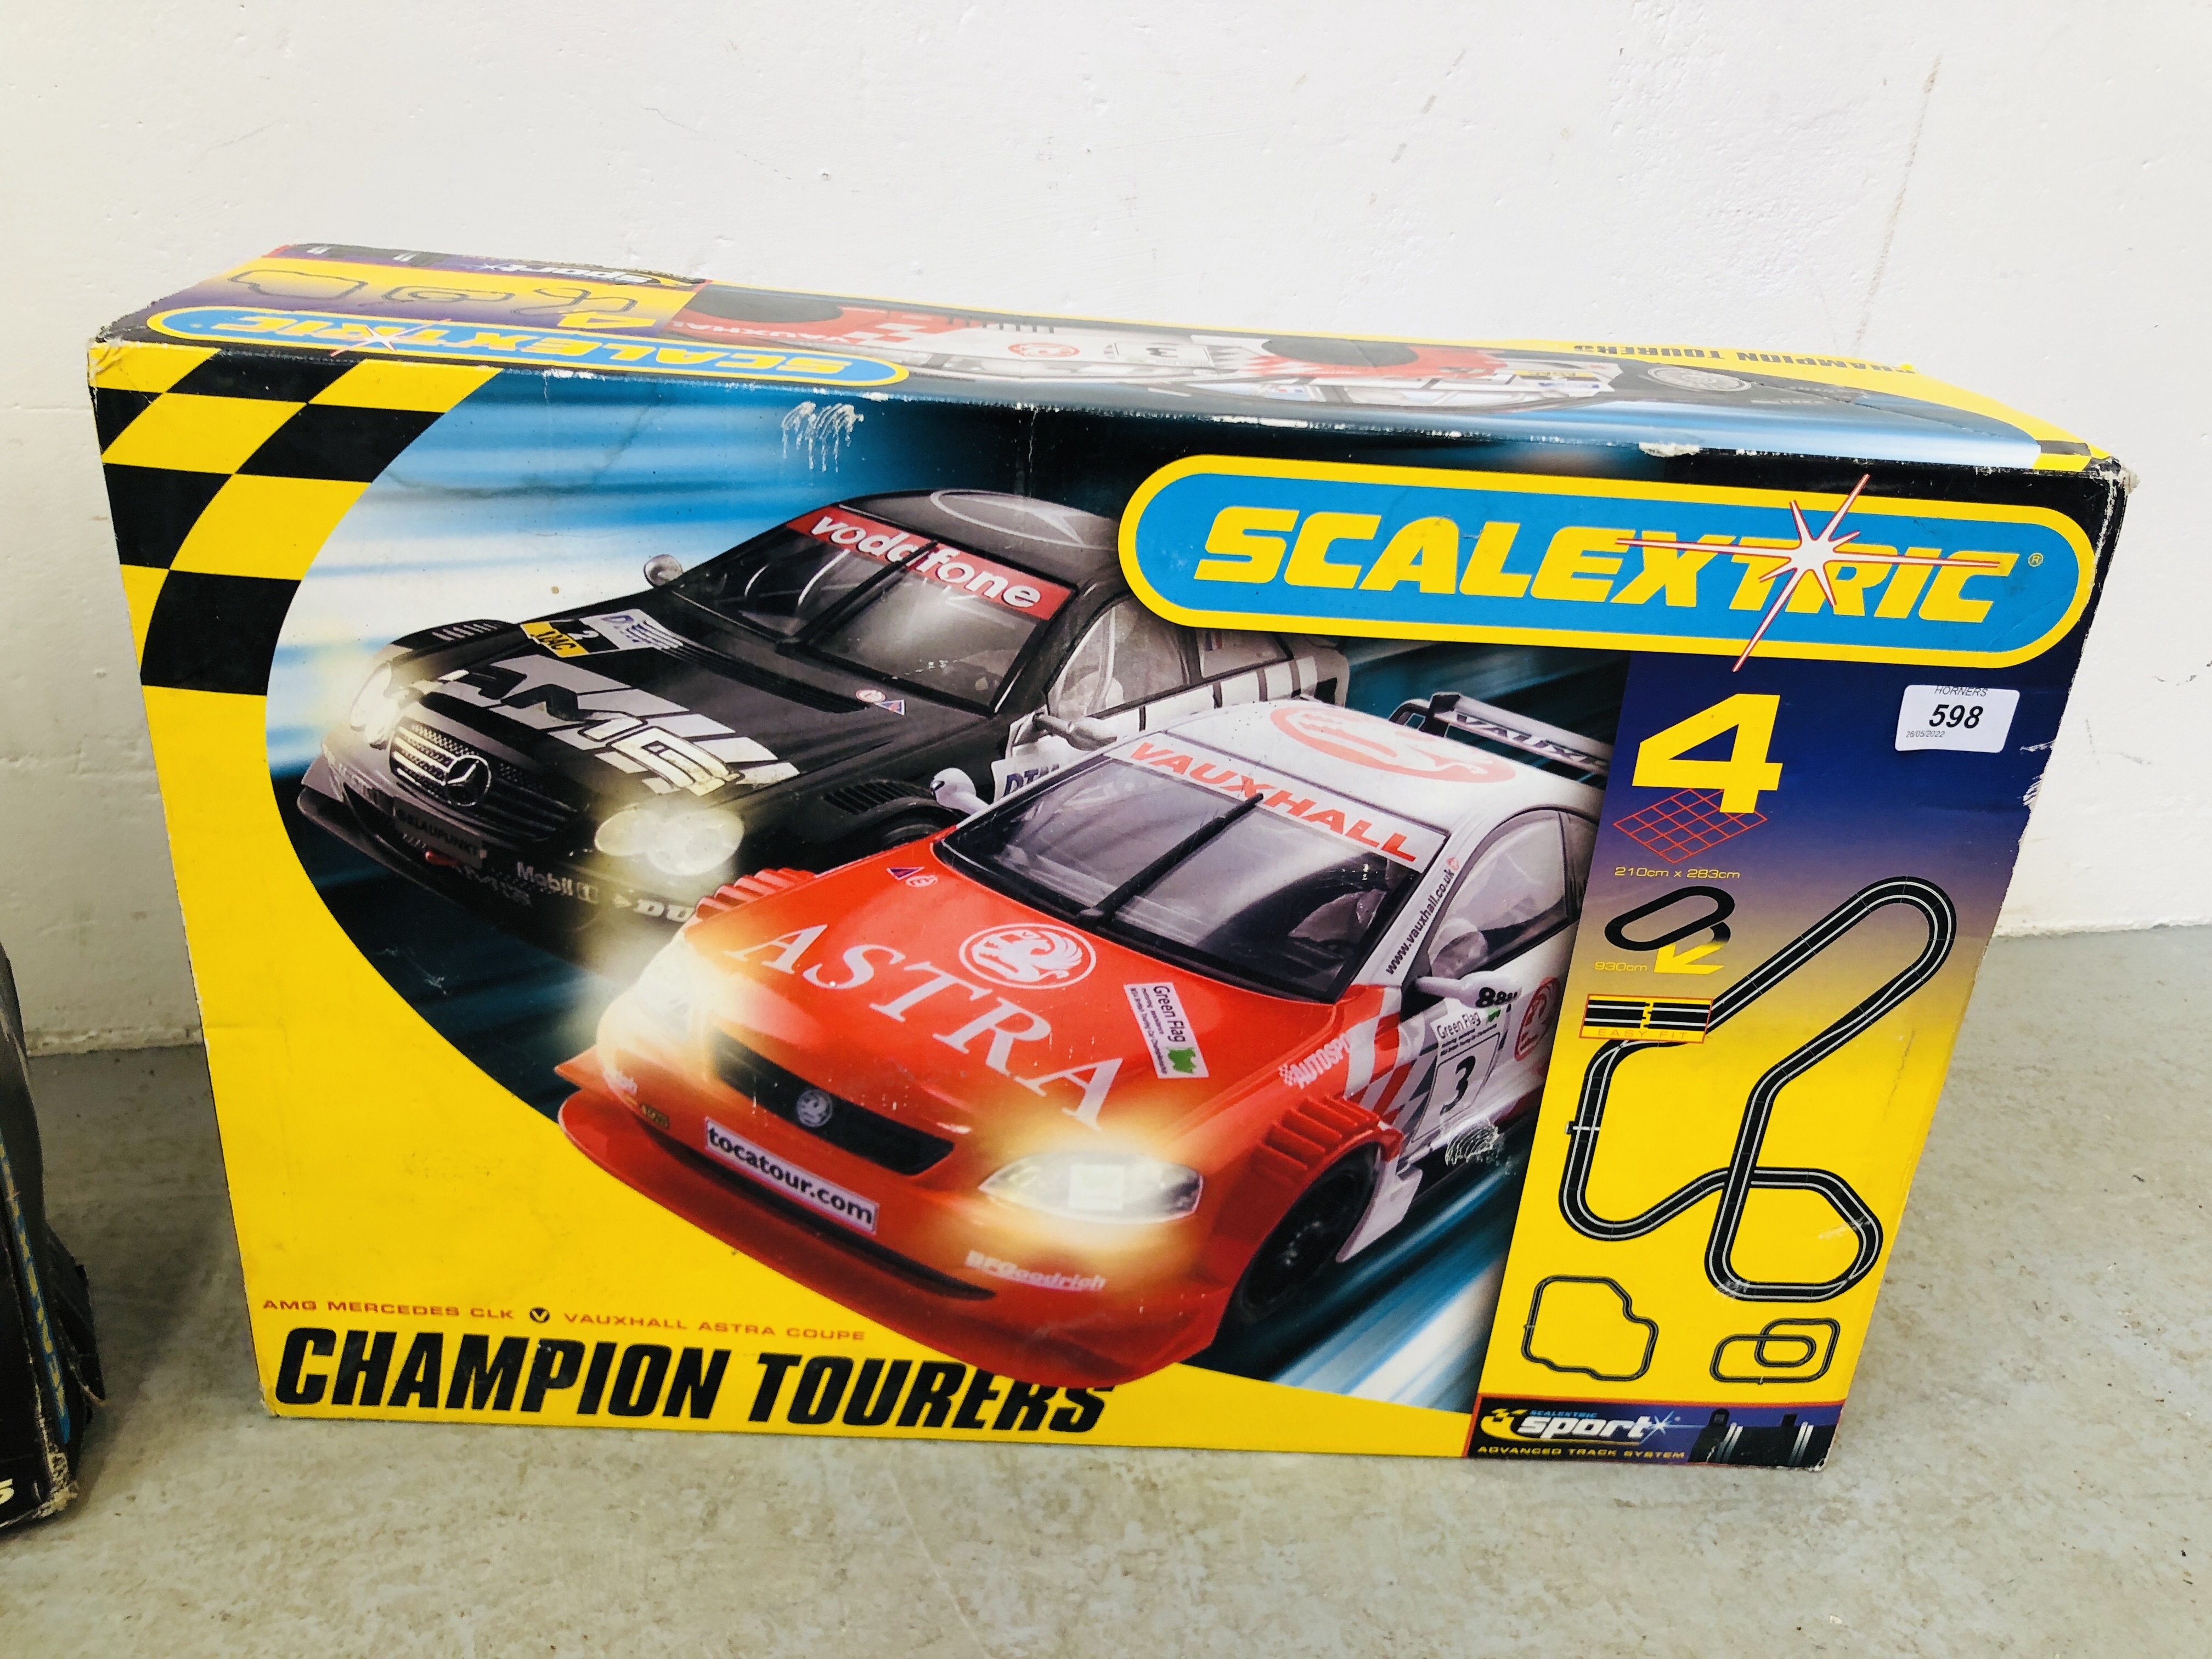 SCALEXTRIC "CHAMPION TOURERS" RACING GAME AND SCALEXTRIC "FORMULA ONE" RACING GAME - Image 2 of 8